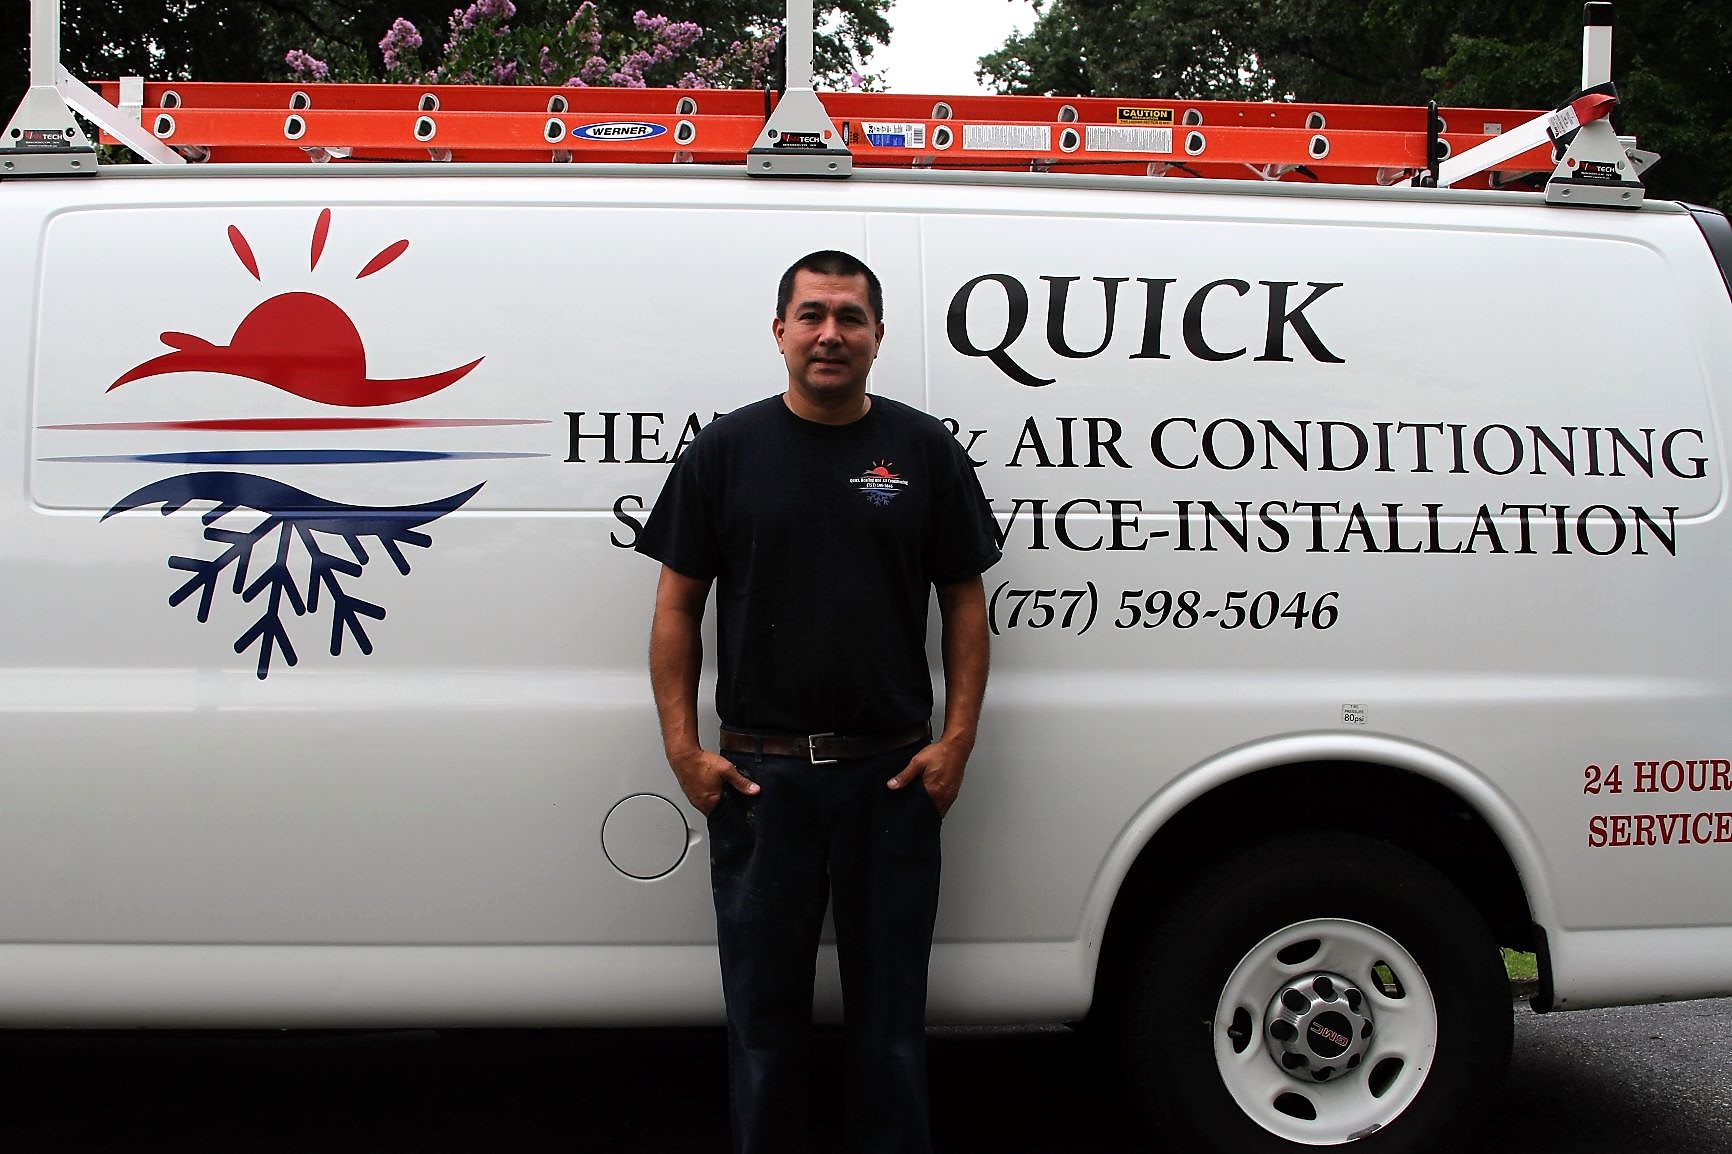 Quick Heating and Air Conditioning